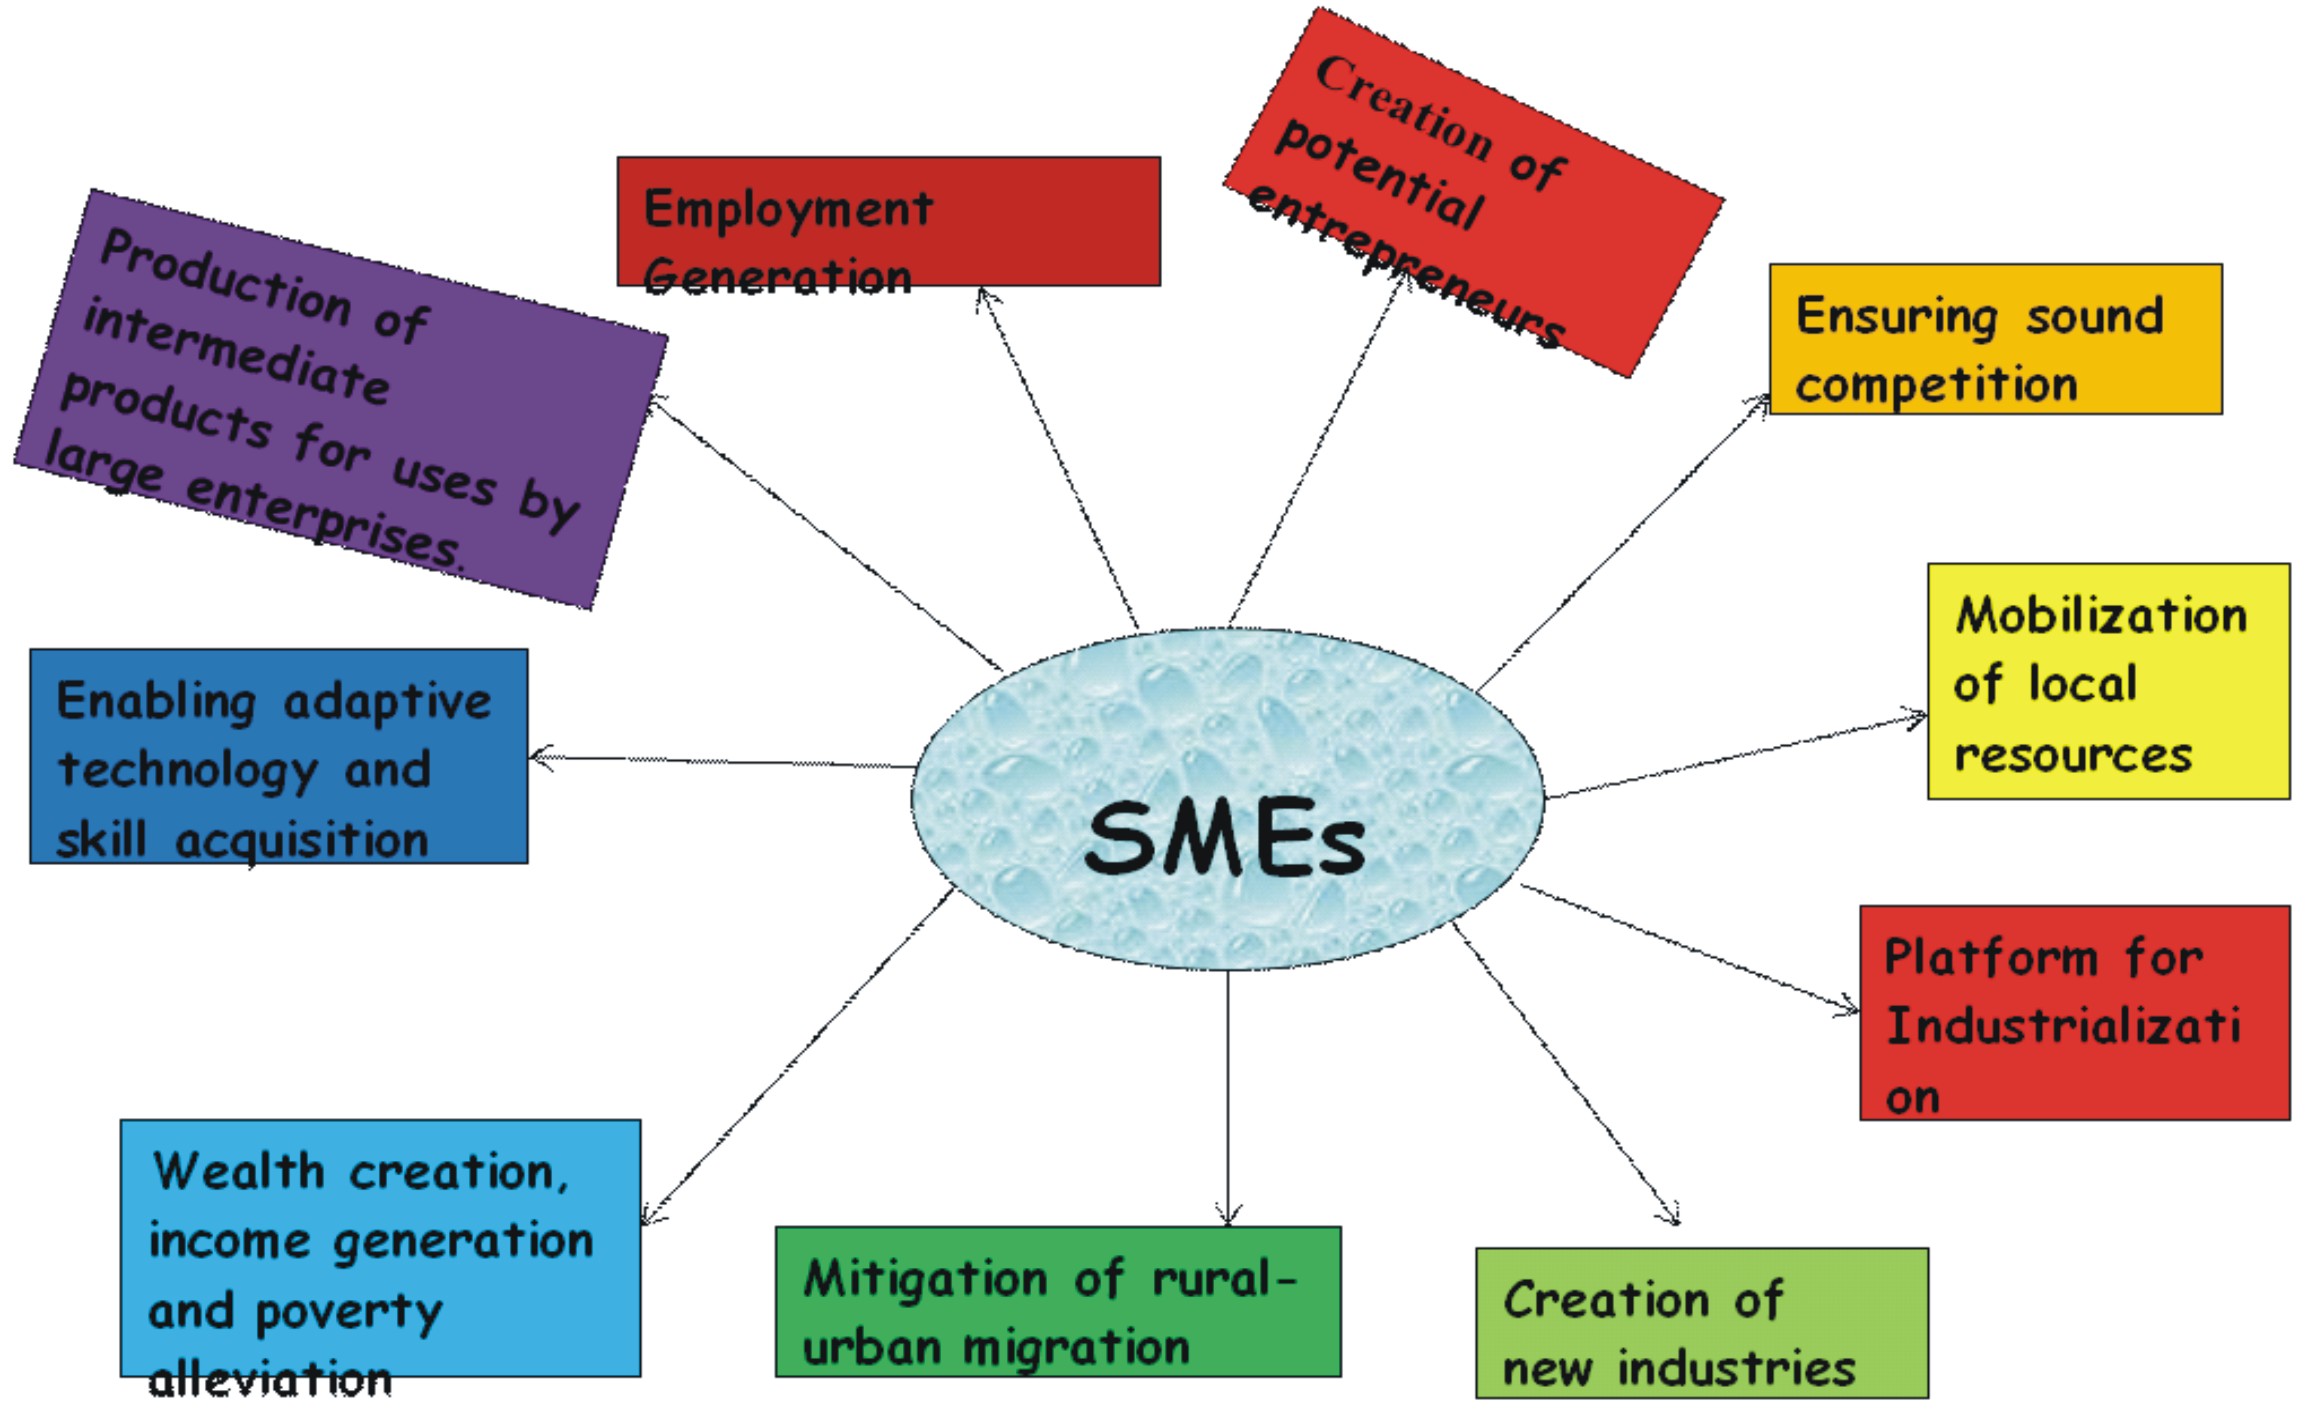 Expert wants adequate funding for SMEs